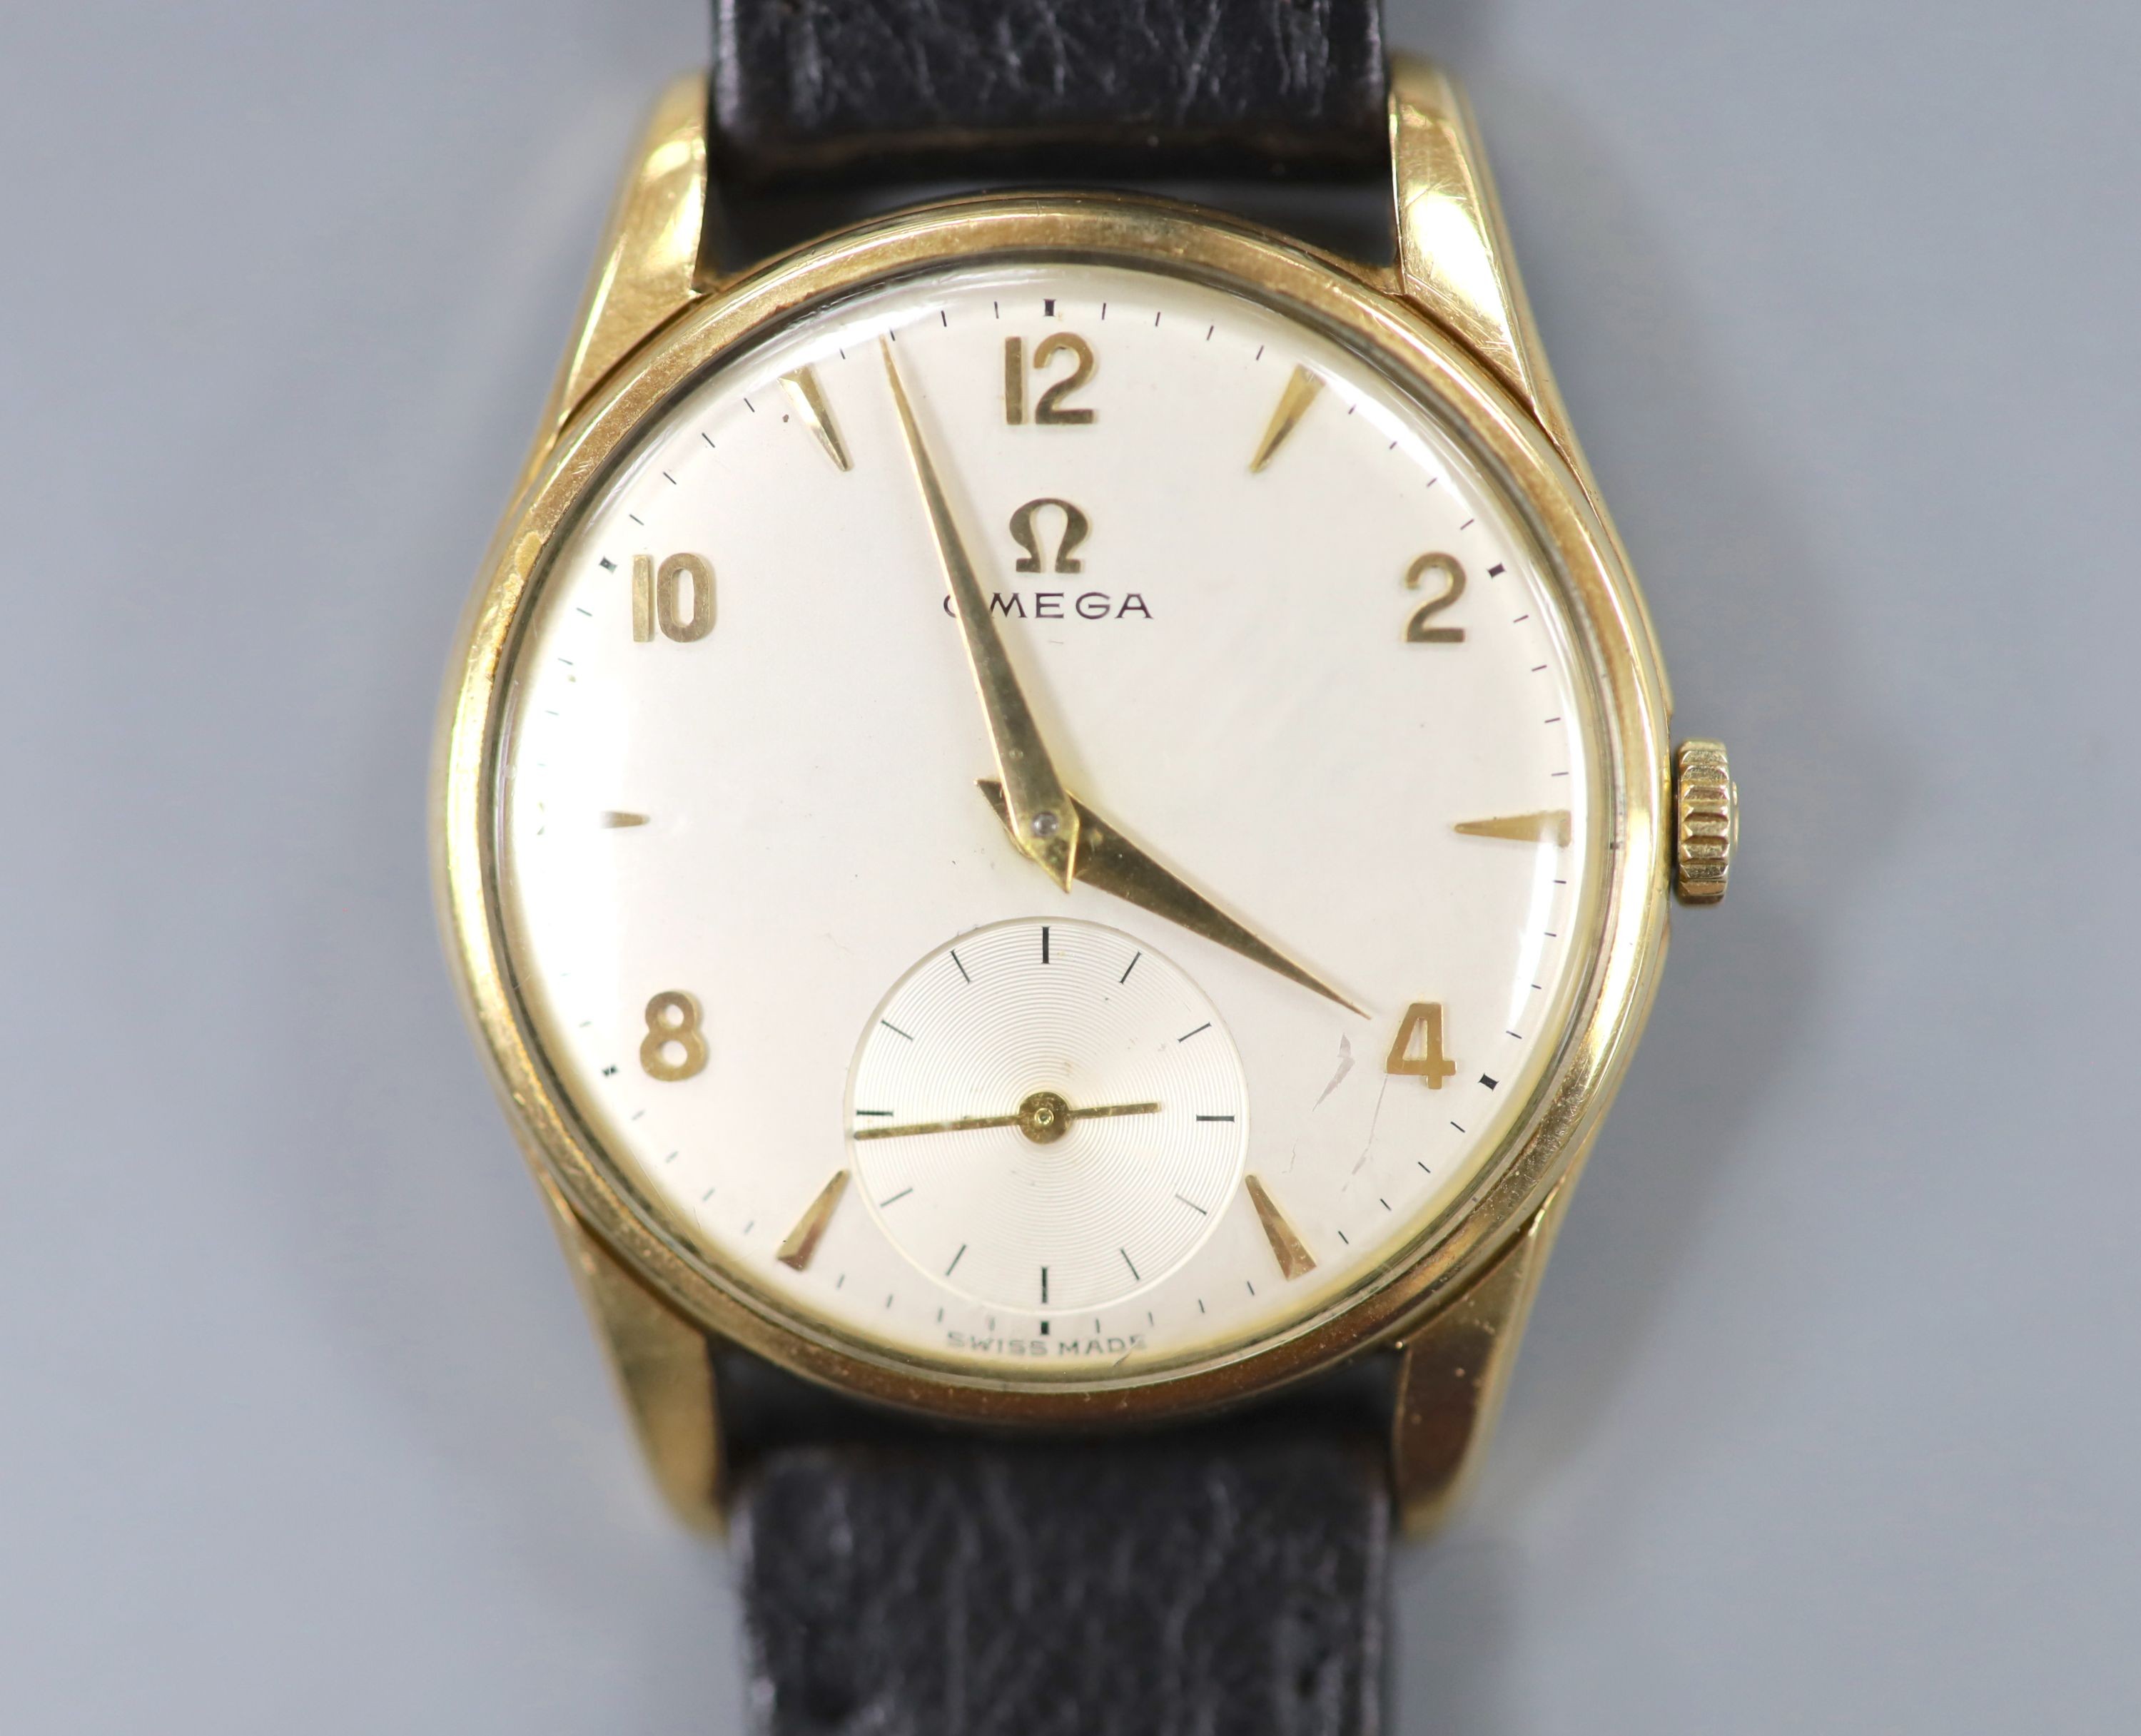 A gentleman's 9ct gold Omega manual wind wrist watch, on associated leather strap, with case back inscription, case diameter 33mm, gross weight 35.1 grams.